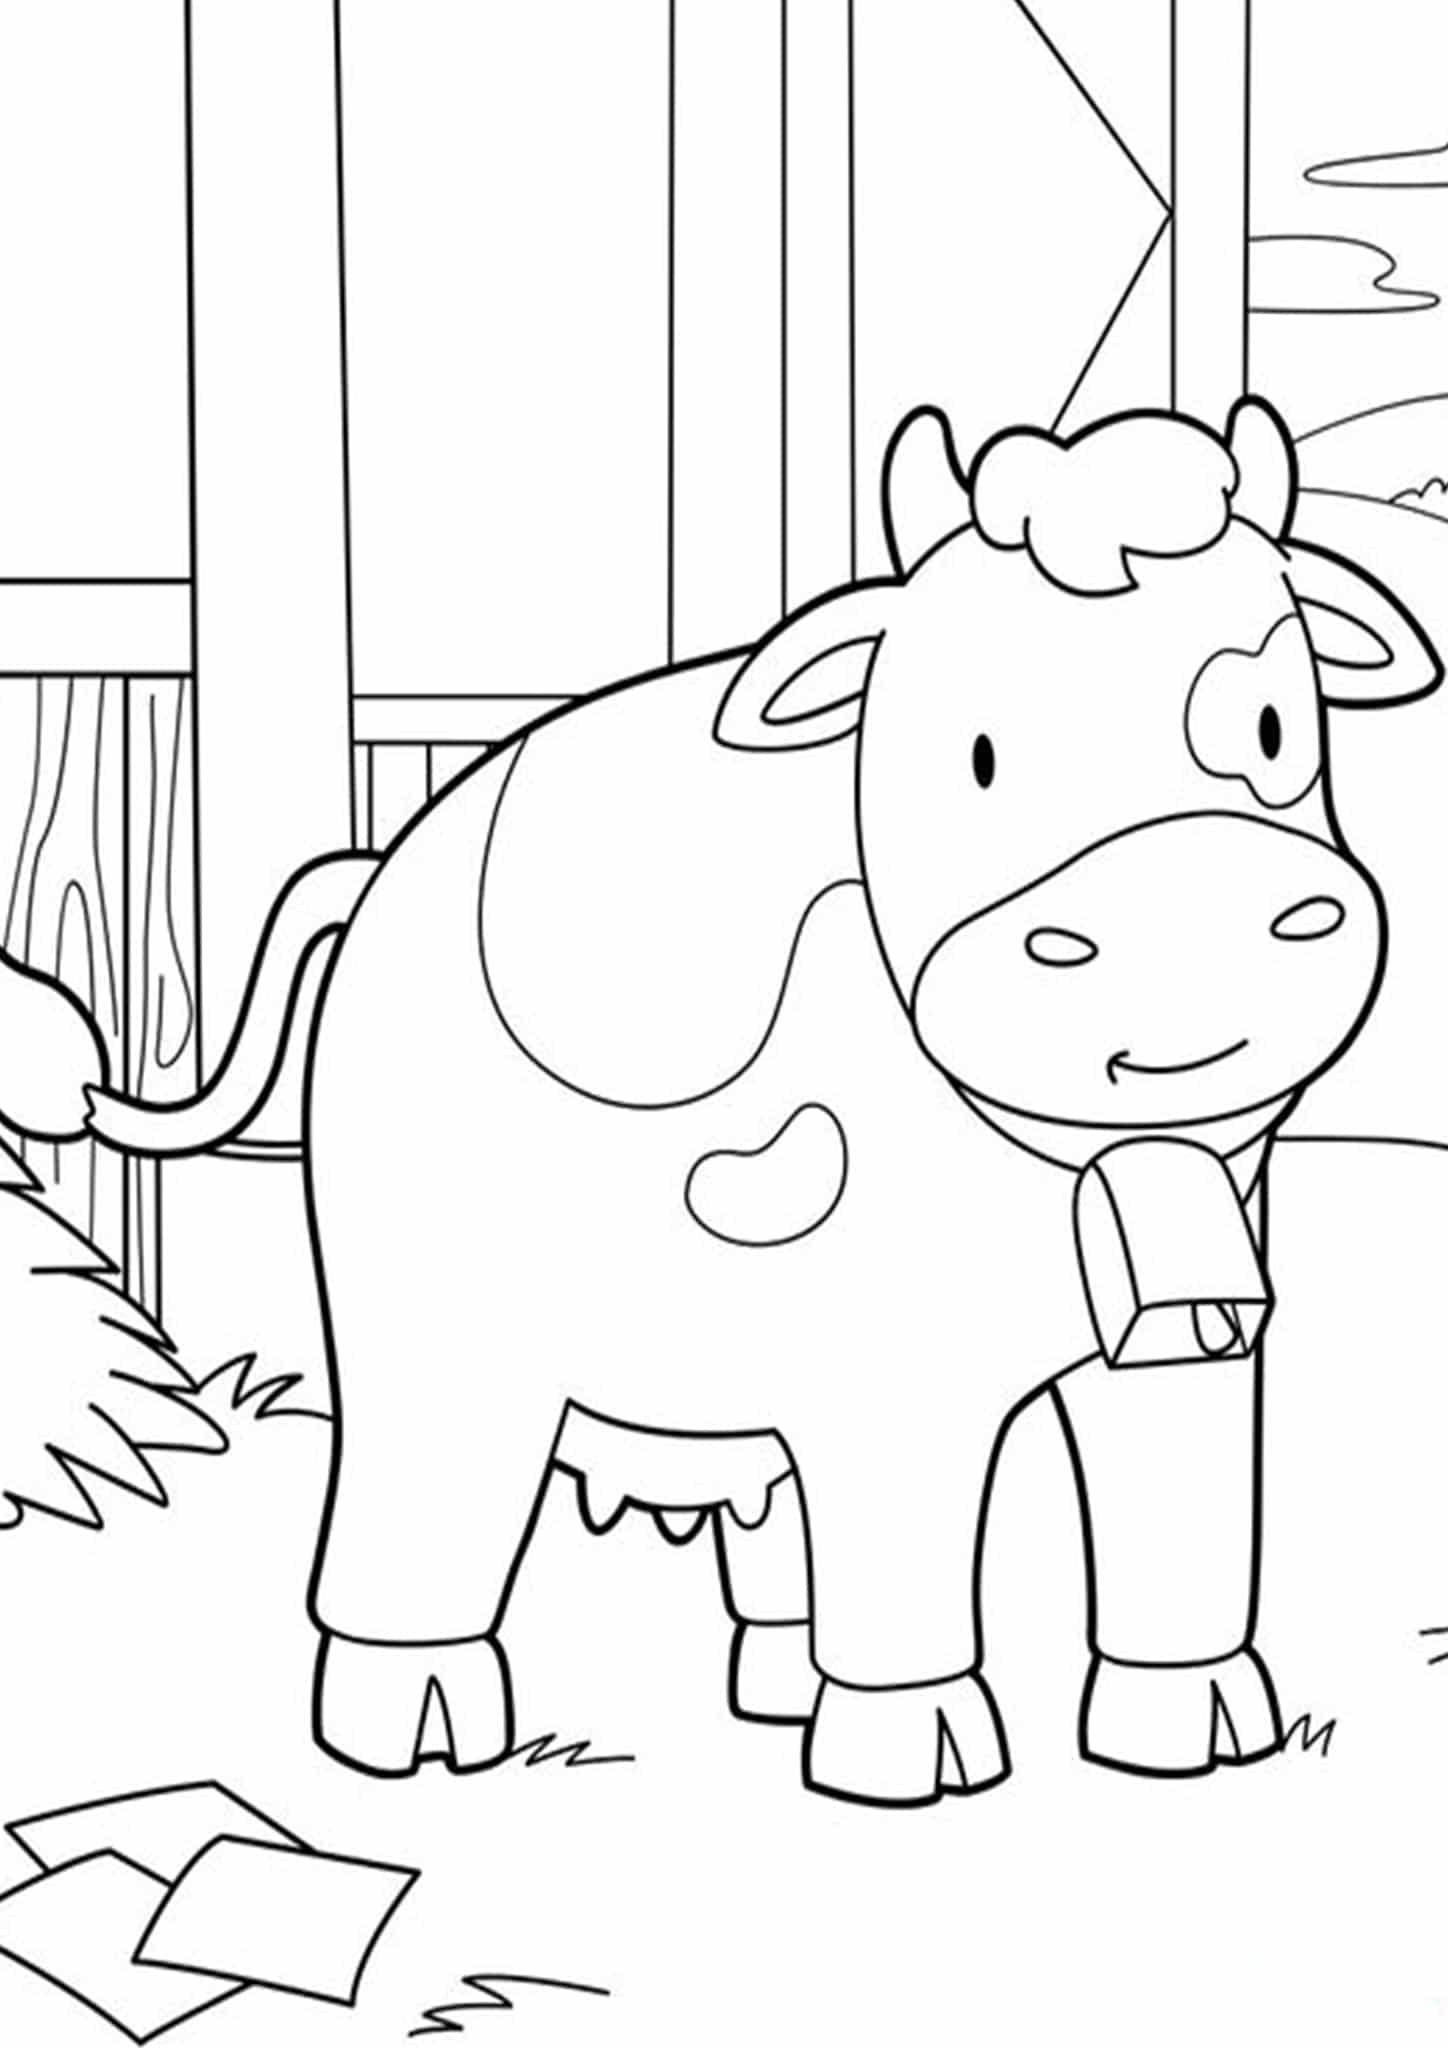 cow-pictures-to-color-crafts-actvities-and-worksheets-for-preschool-toddler-and-kindergarten